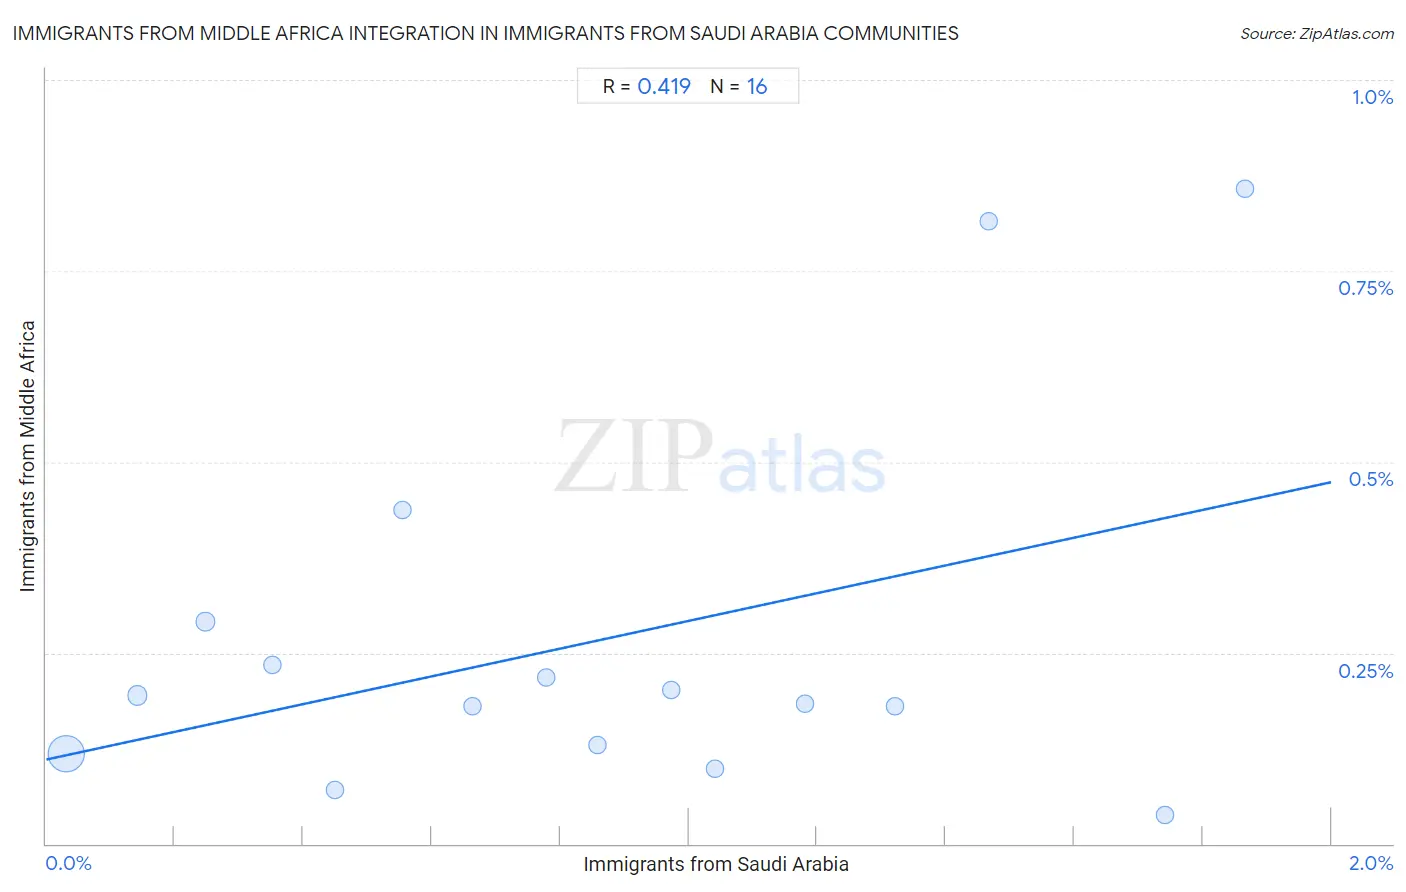 Immigrants from Saudi Arabia Integration in Immigrants from Middle Africa Communities